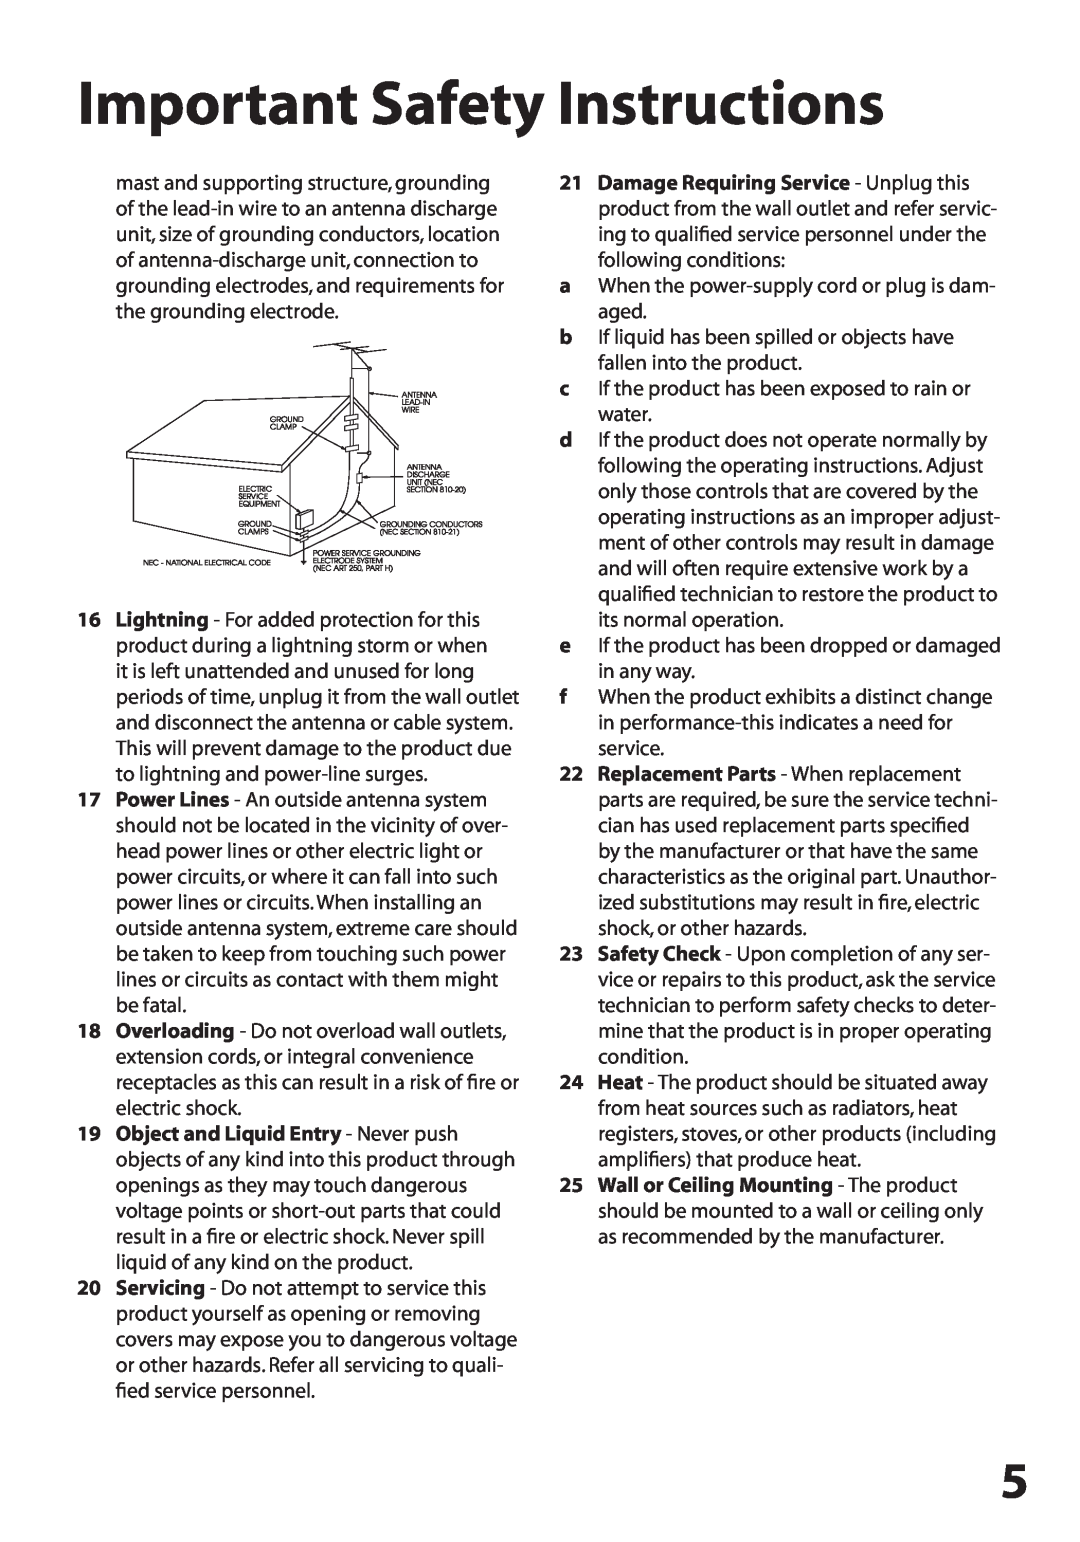 GoVideo R6750 manual Important Safety Instructions, a When the power-supply cord or plug is dam- aged 